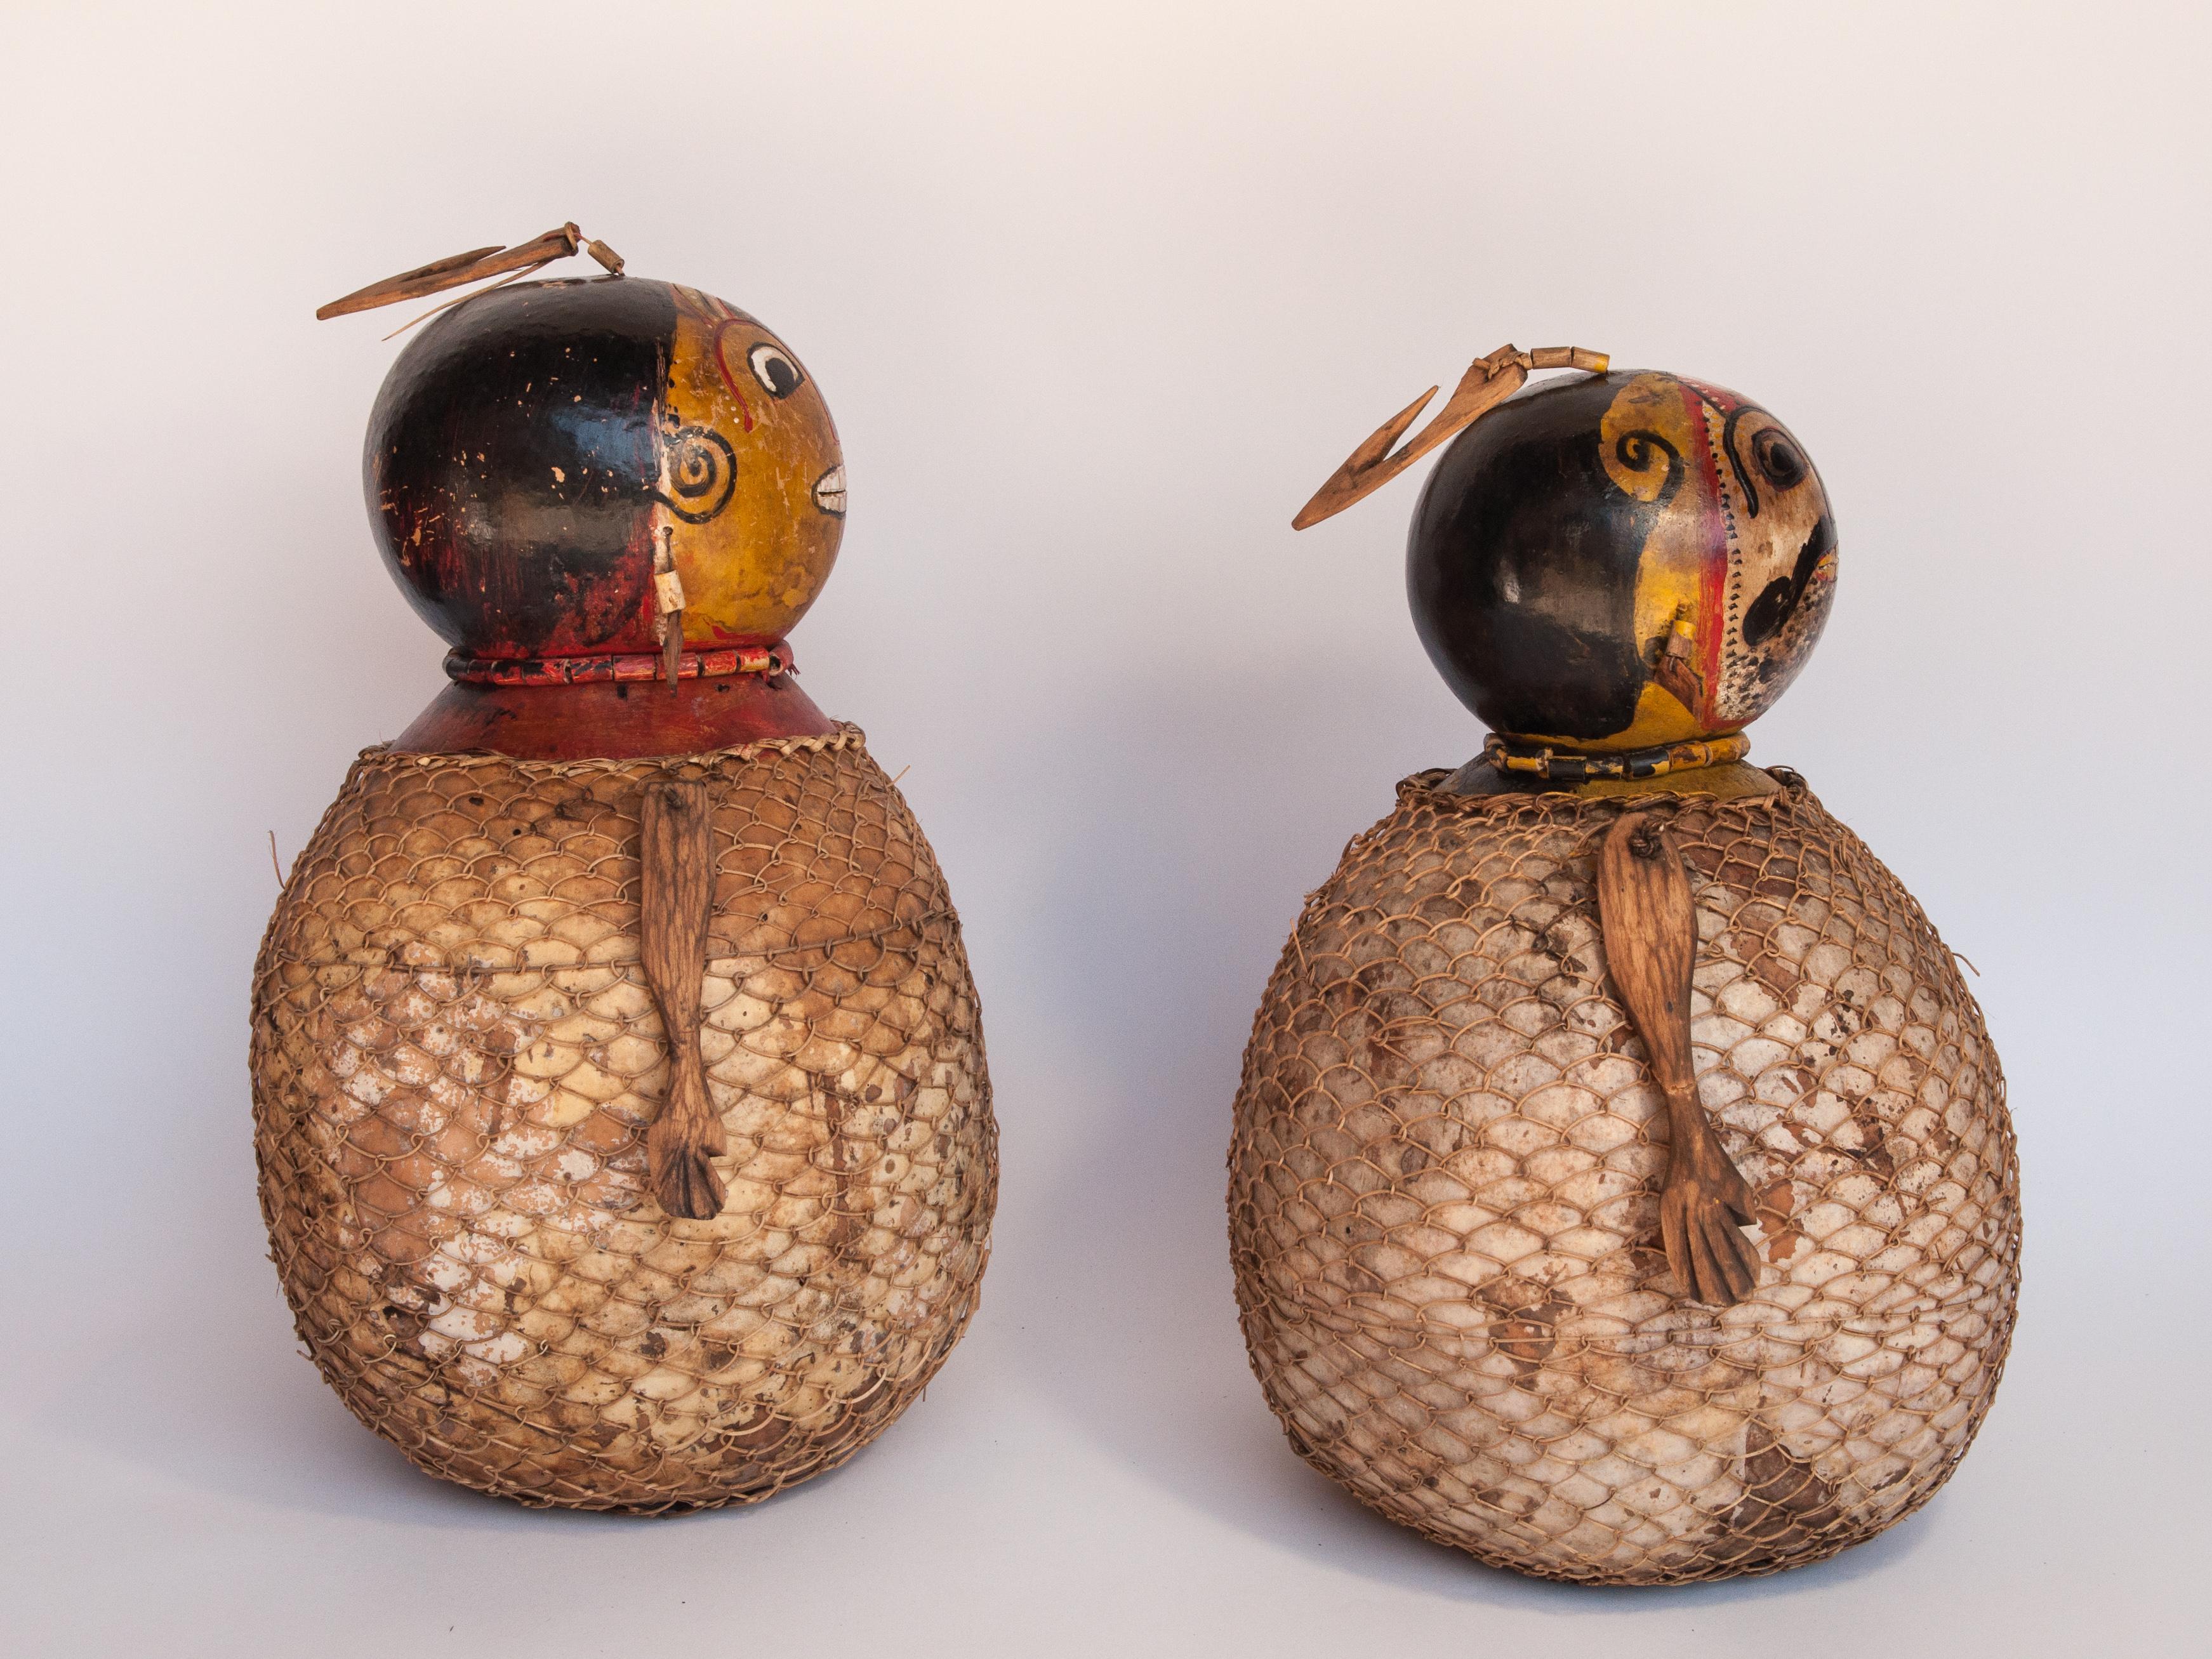 Mother-of-Pearl Vintage Painted Gourd Couple, Folk Art from Lombok, Indonesia, Late 20th Century